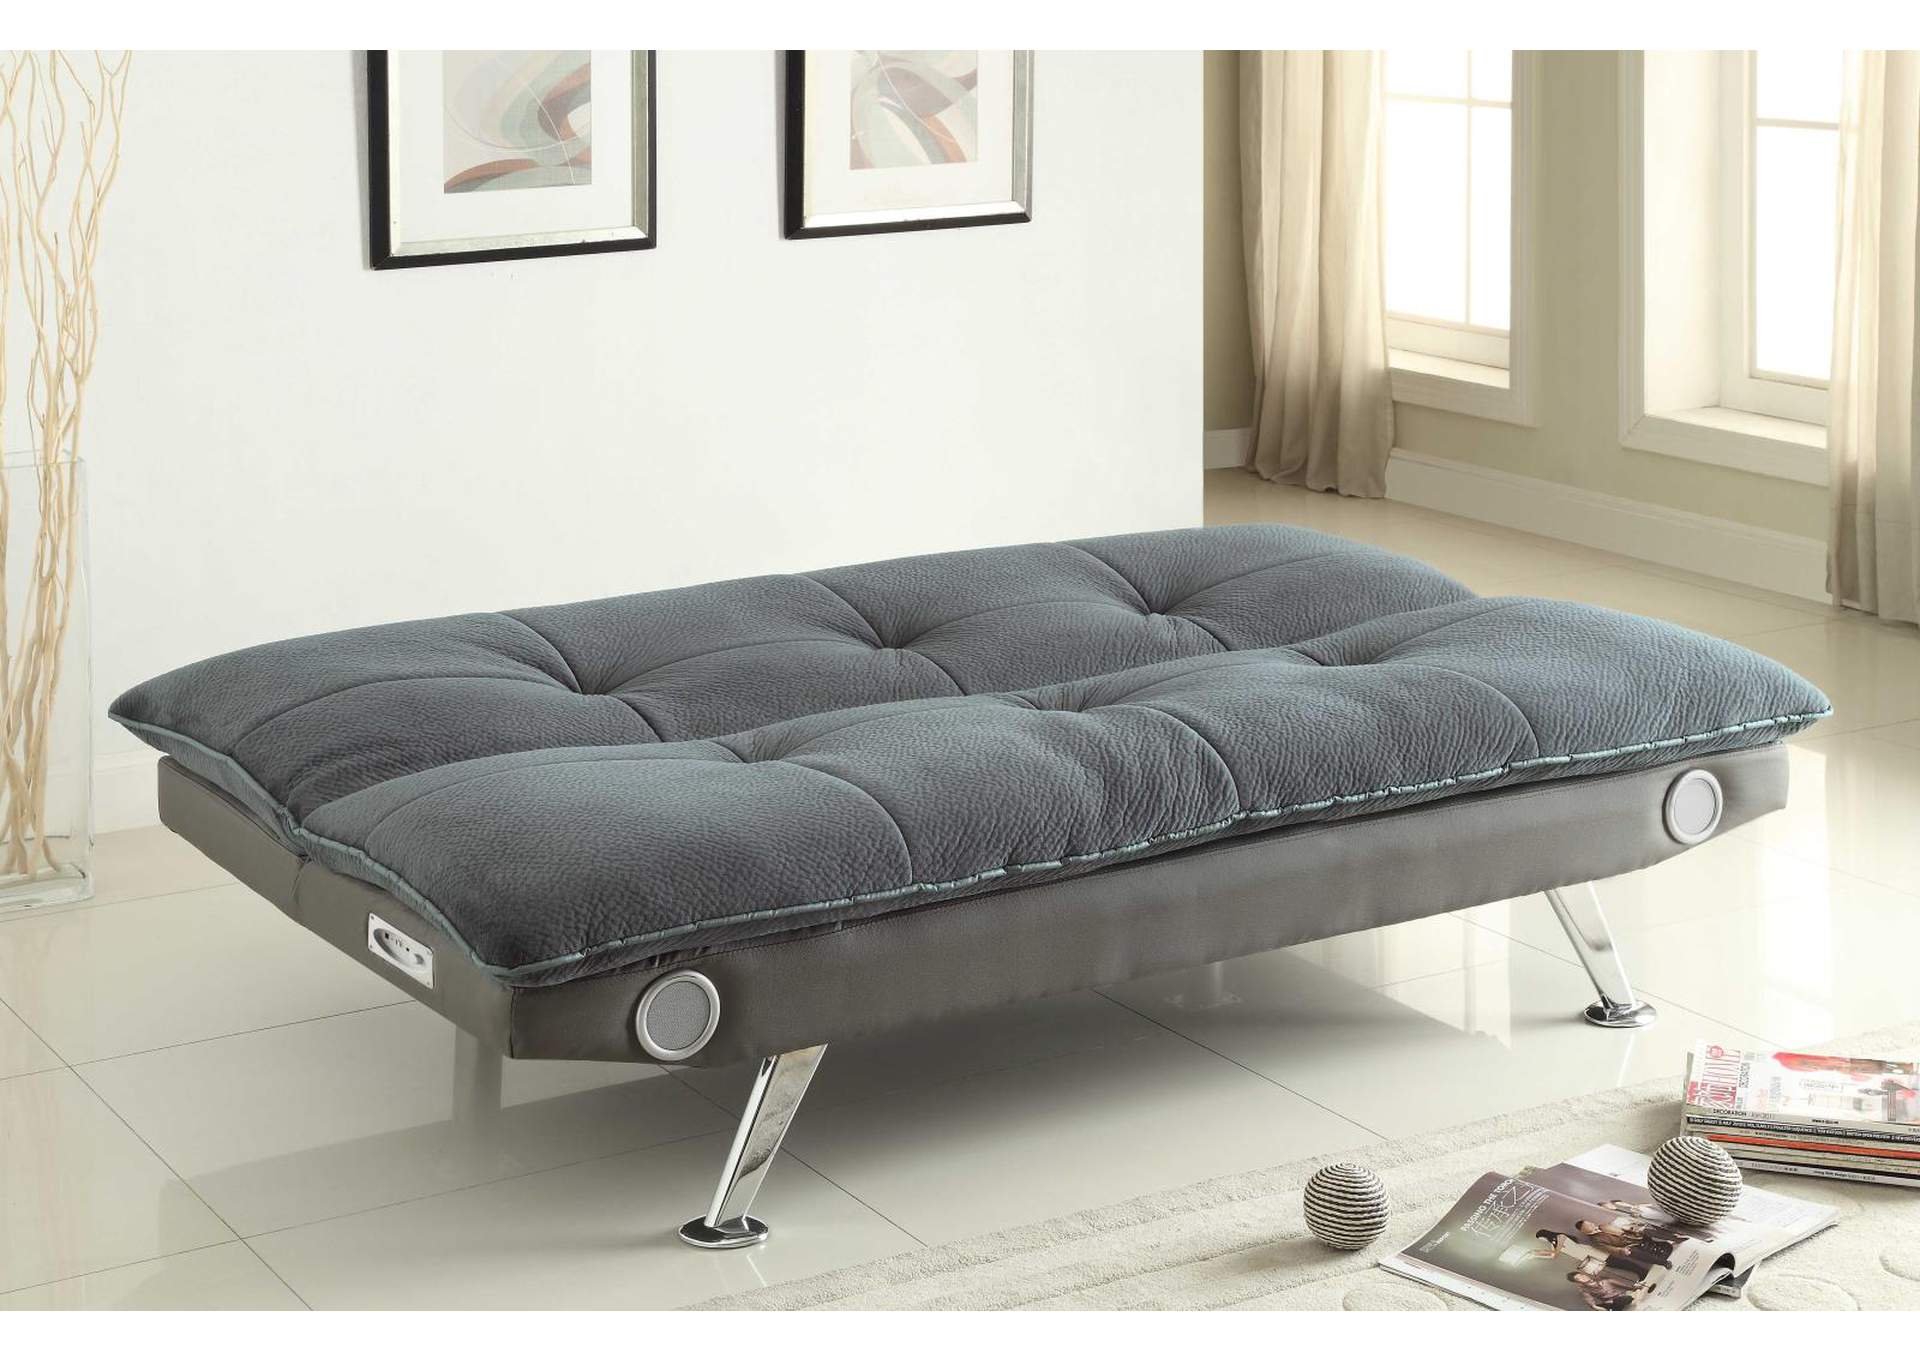 Odel Upholstered Sofa Bed with Bluetooth Speakers Grey,Coaster Furniture